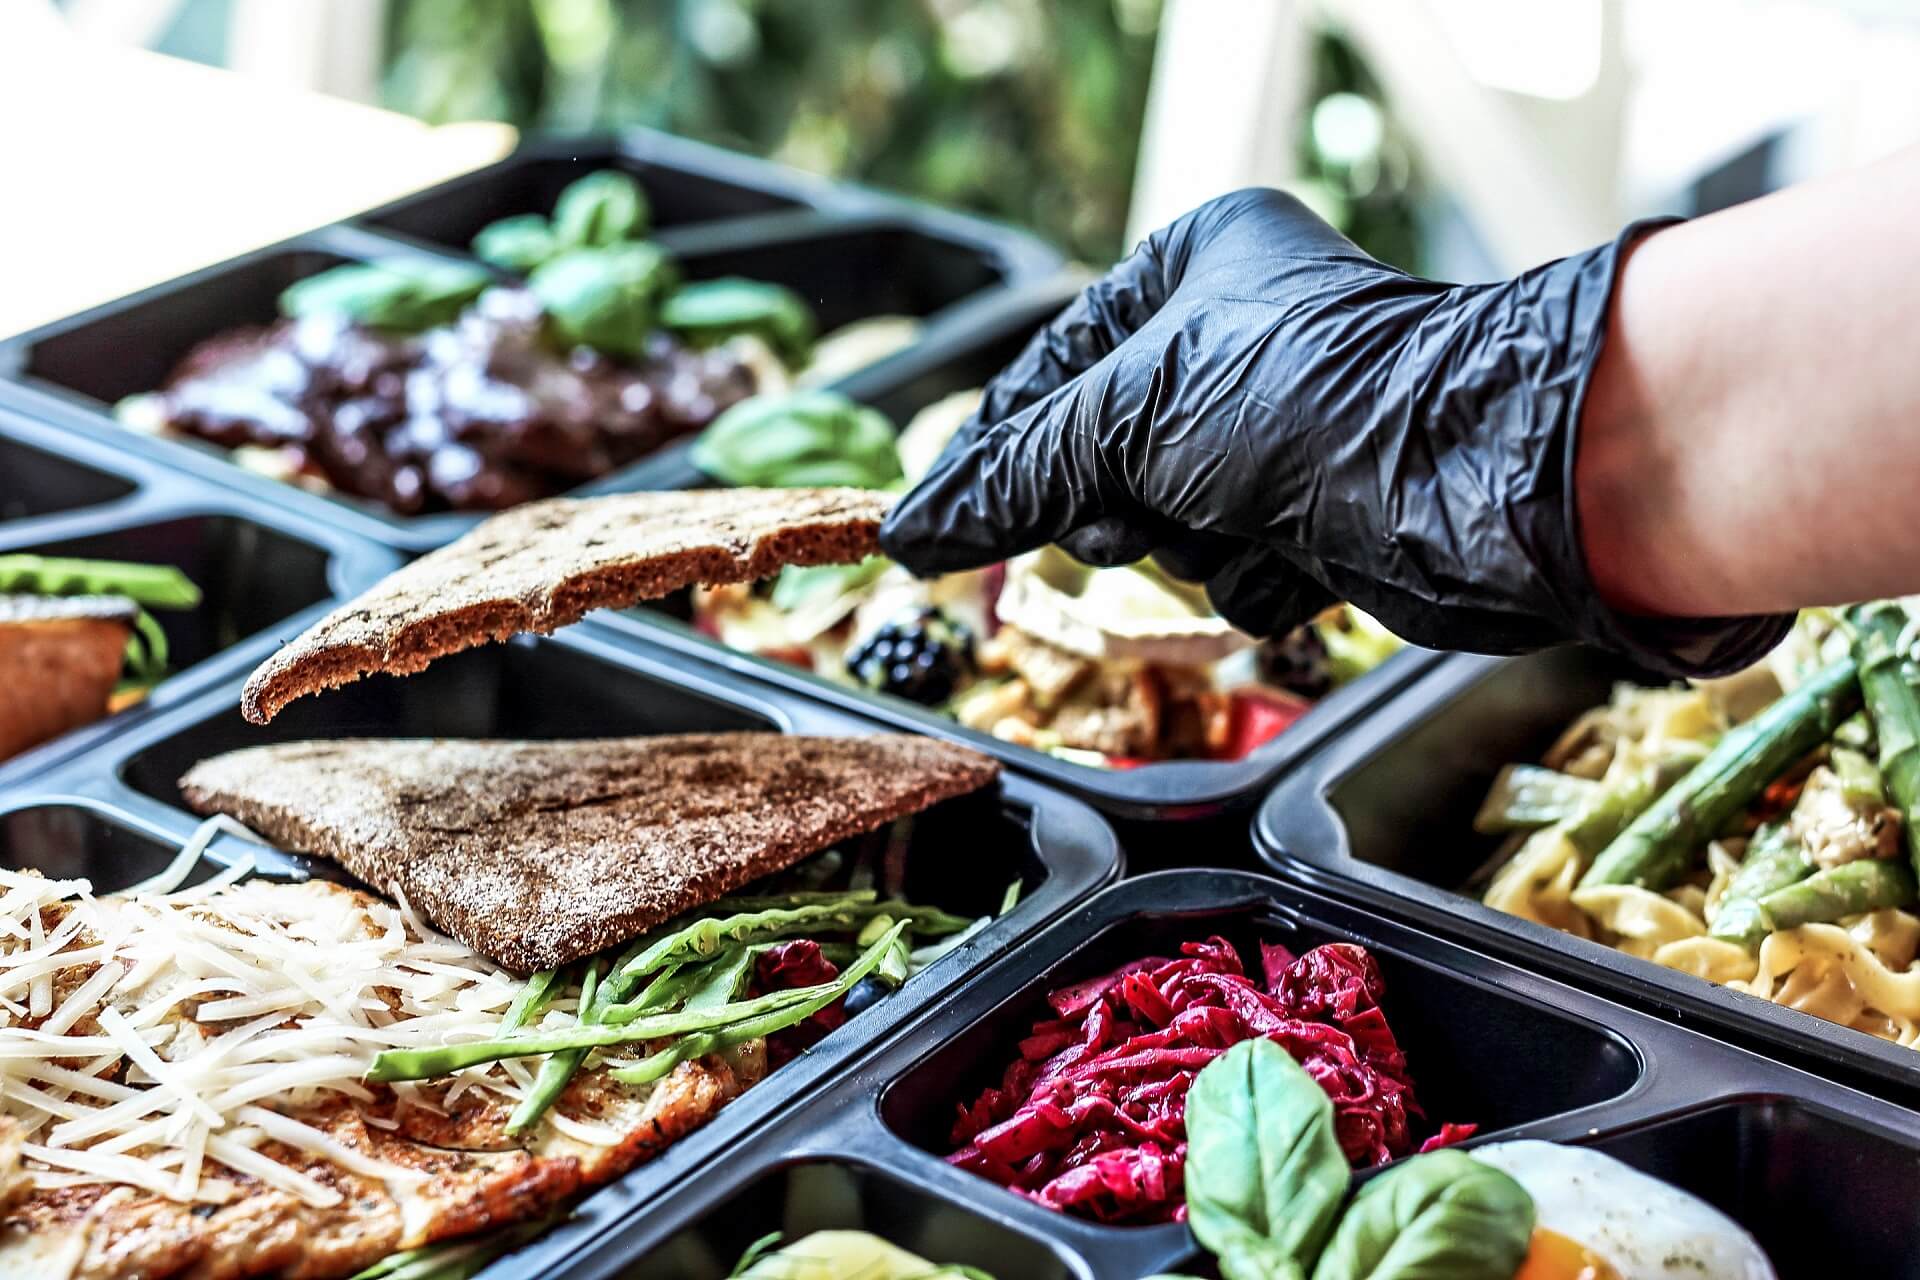 Food-to-go --> Tackling to-go containers is part of culinary predictions 2023